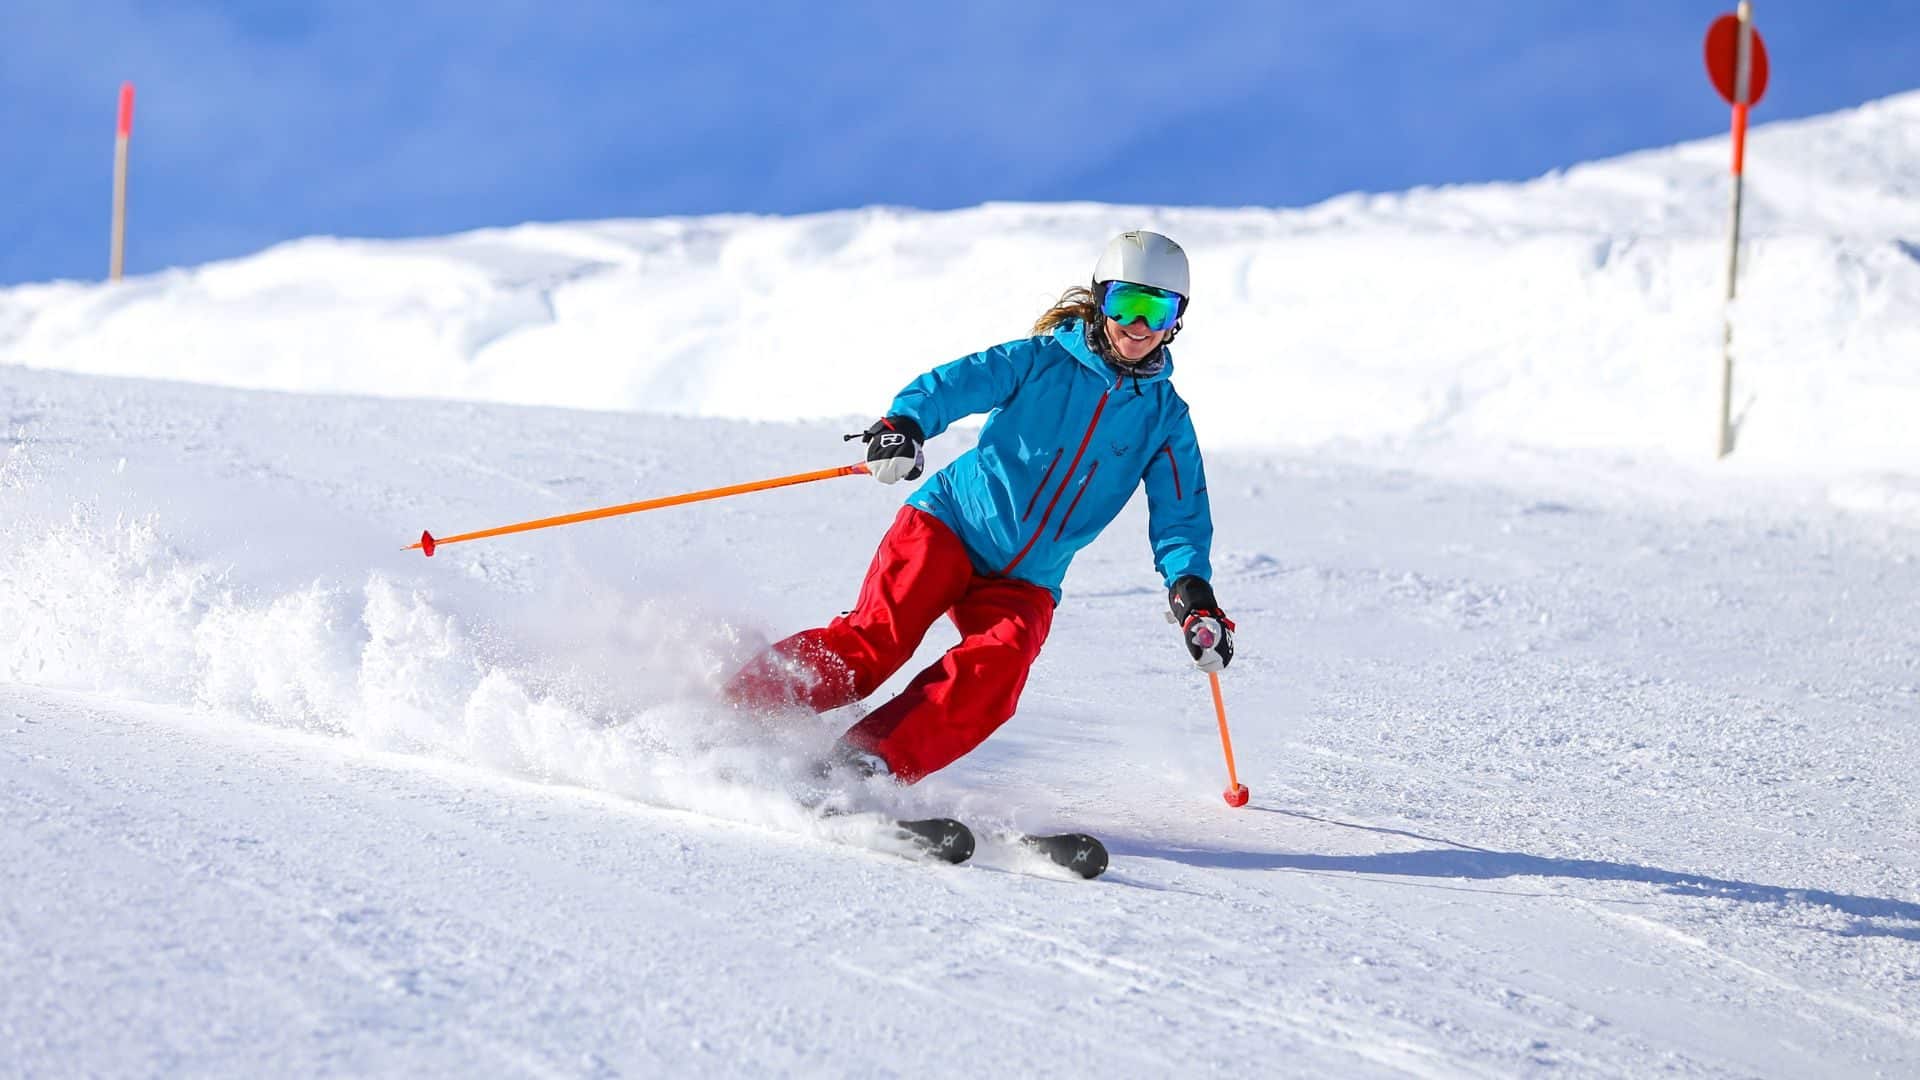 Woman in red downhill skiing surrounded by white snow